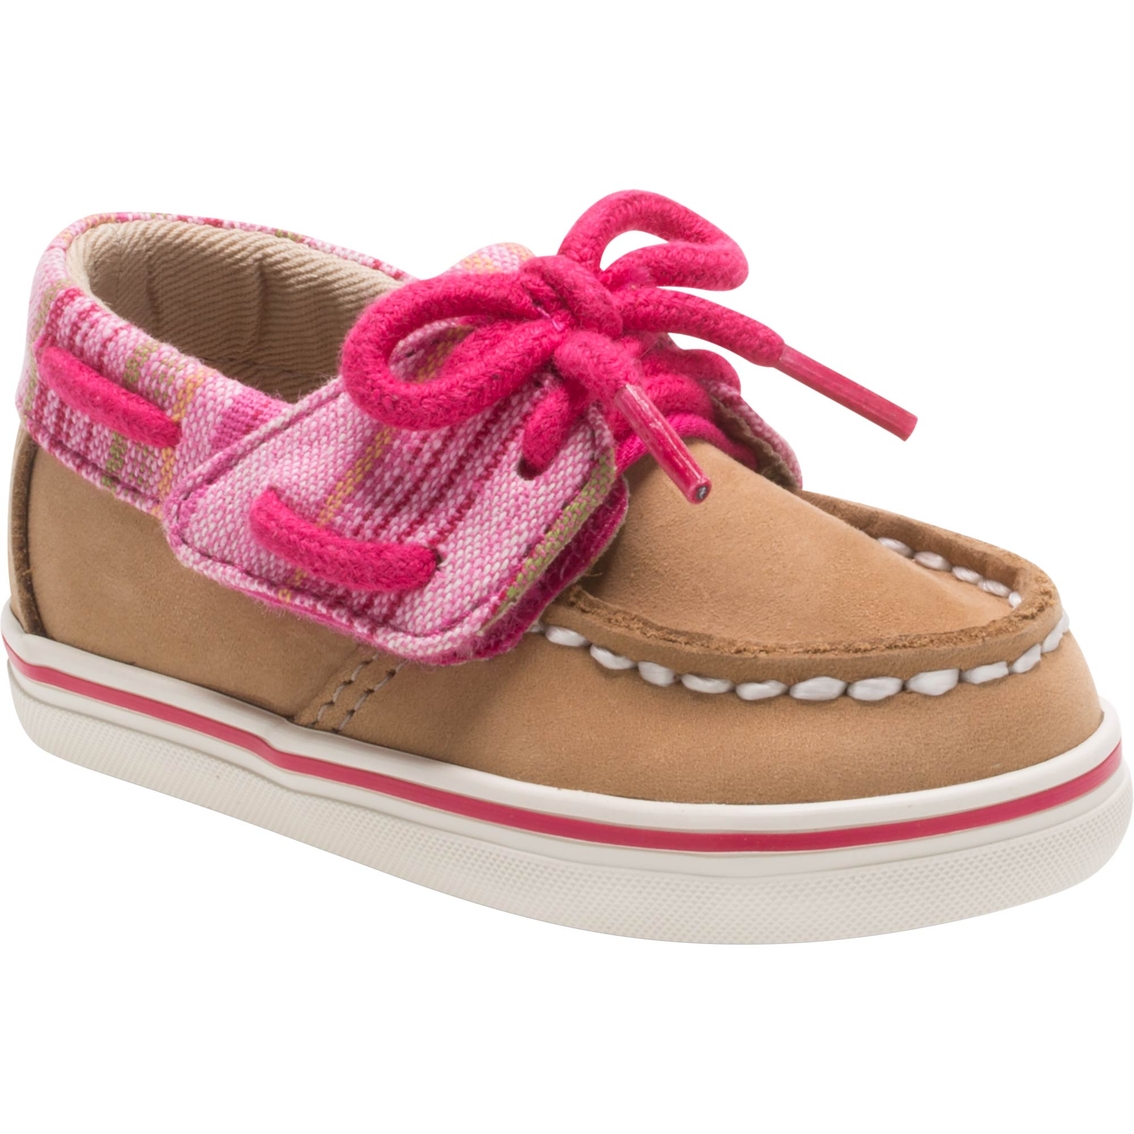 sperry shoes for infants